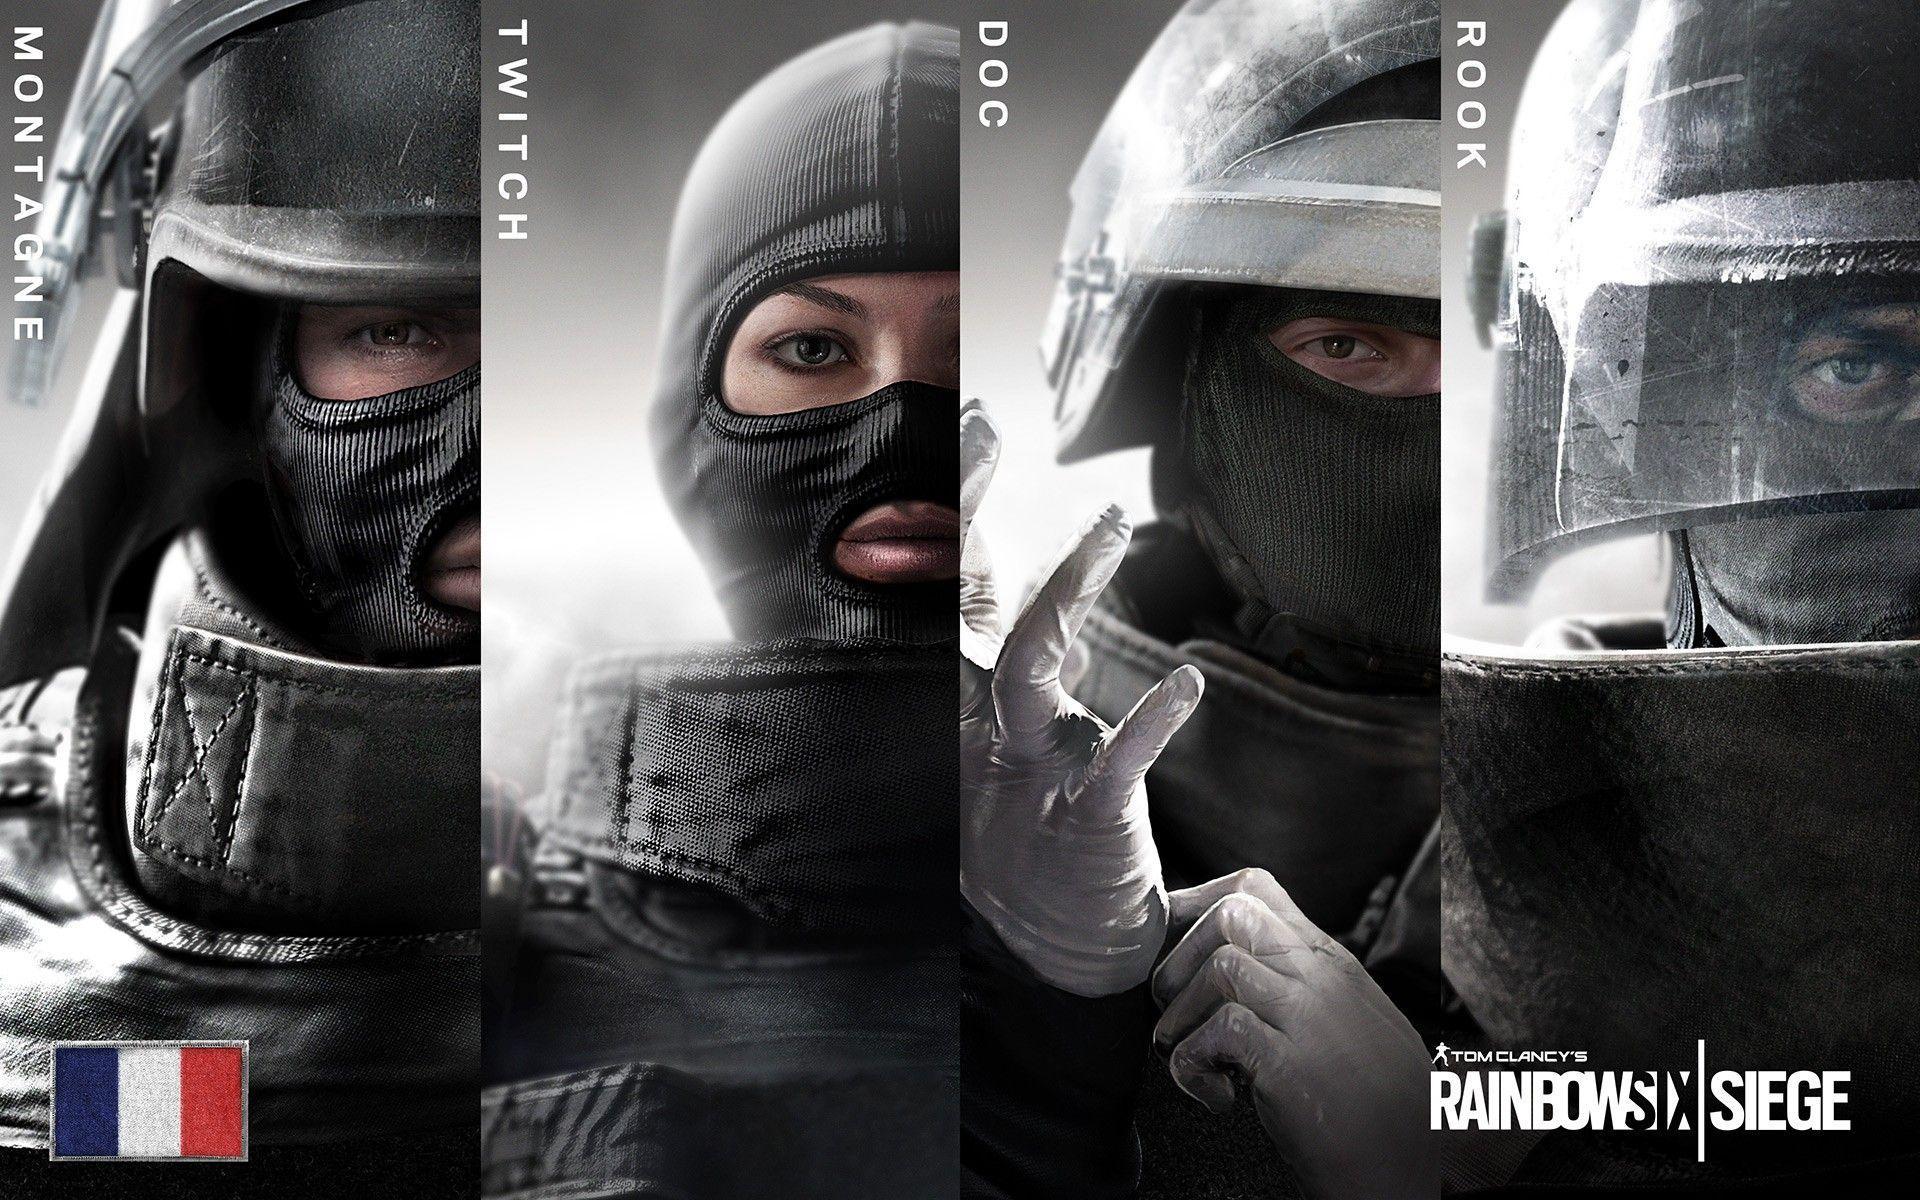 police, Rainbow Six: Siege, Video Games, Artwork, Special Forces